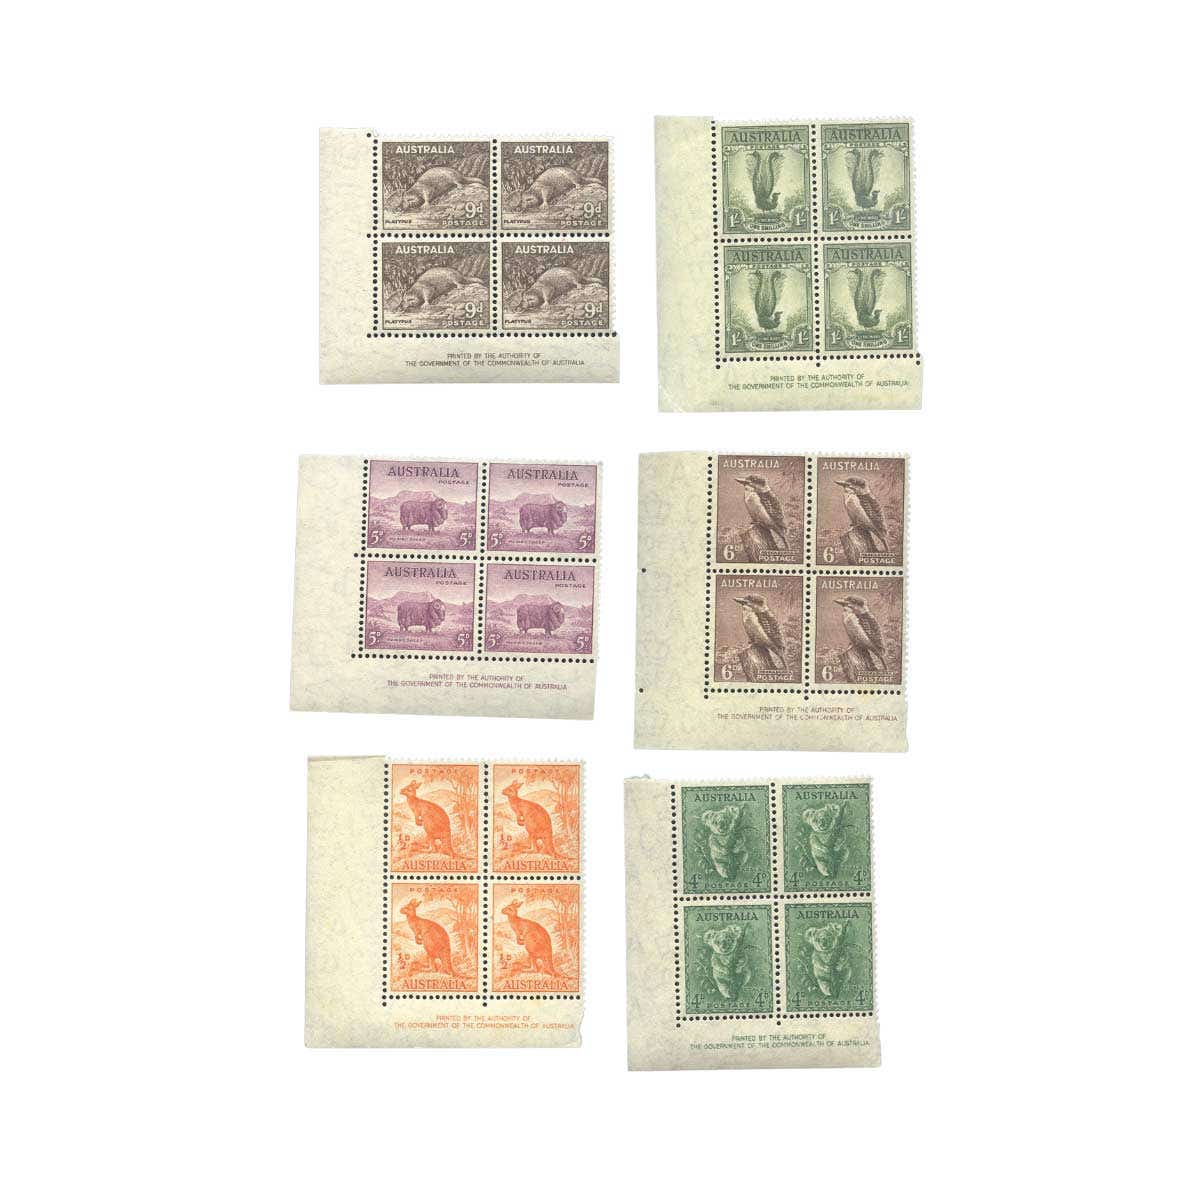 1940-45 1/2d-1/- Zoological Authority Imprint Block of Four Set of 6 Different MUH